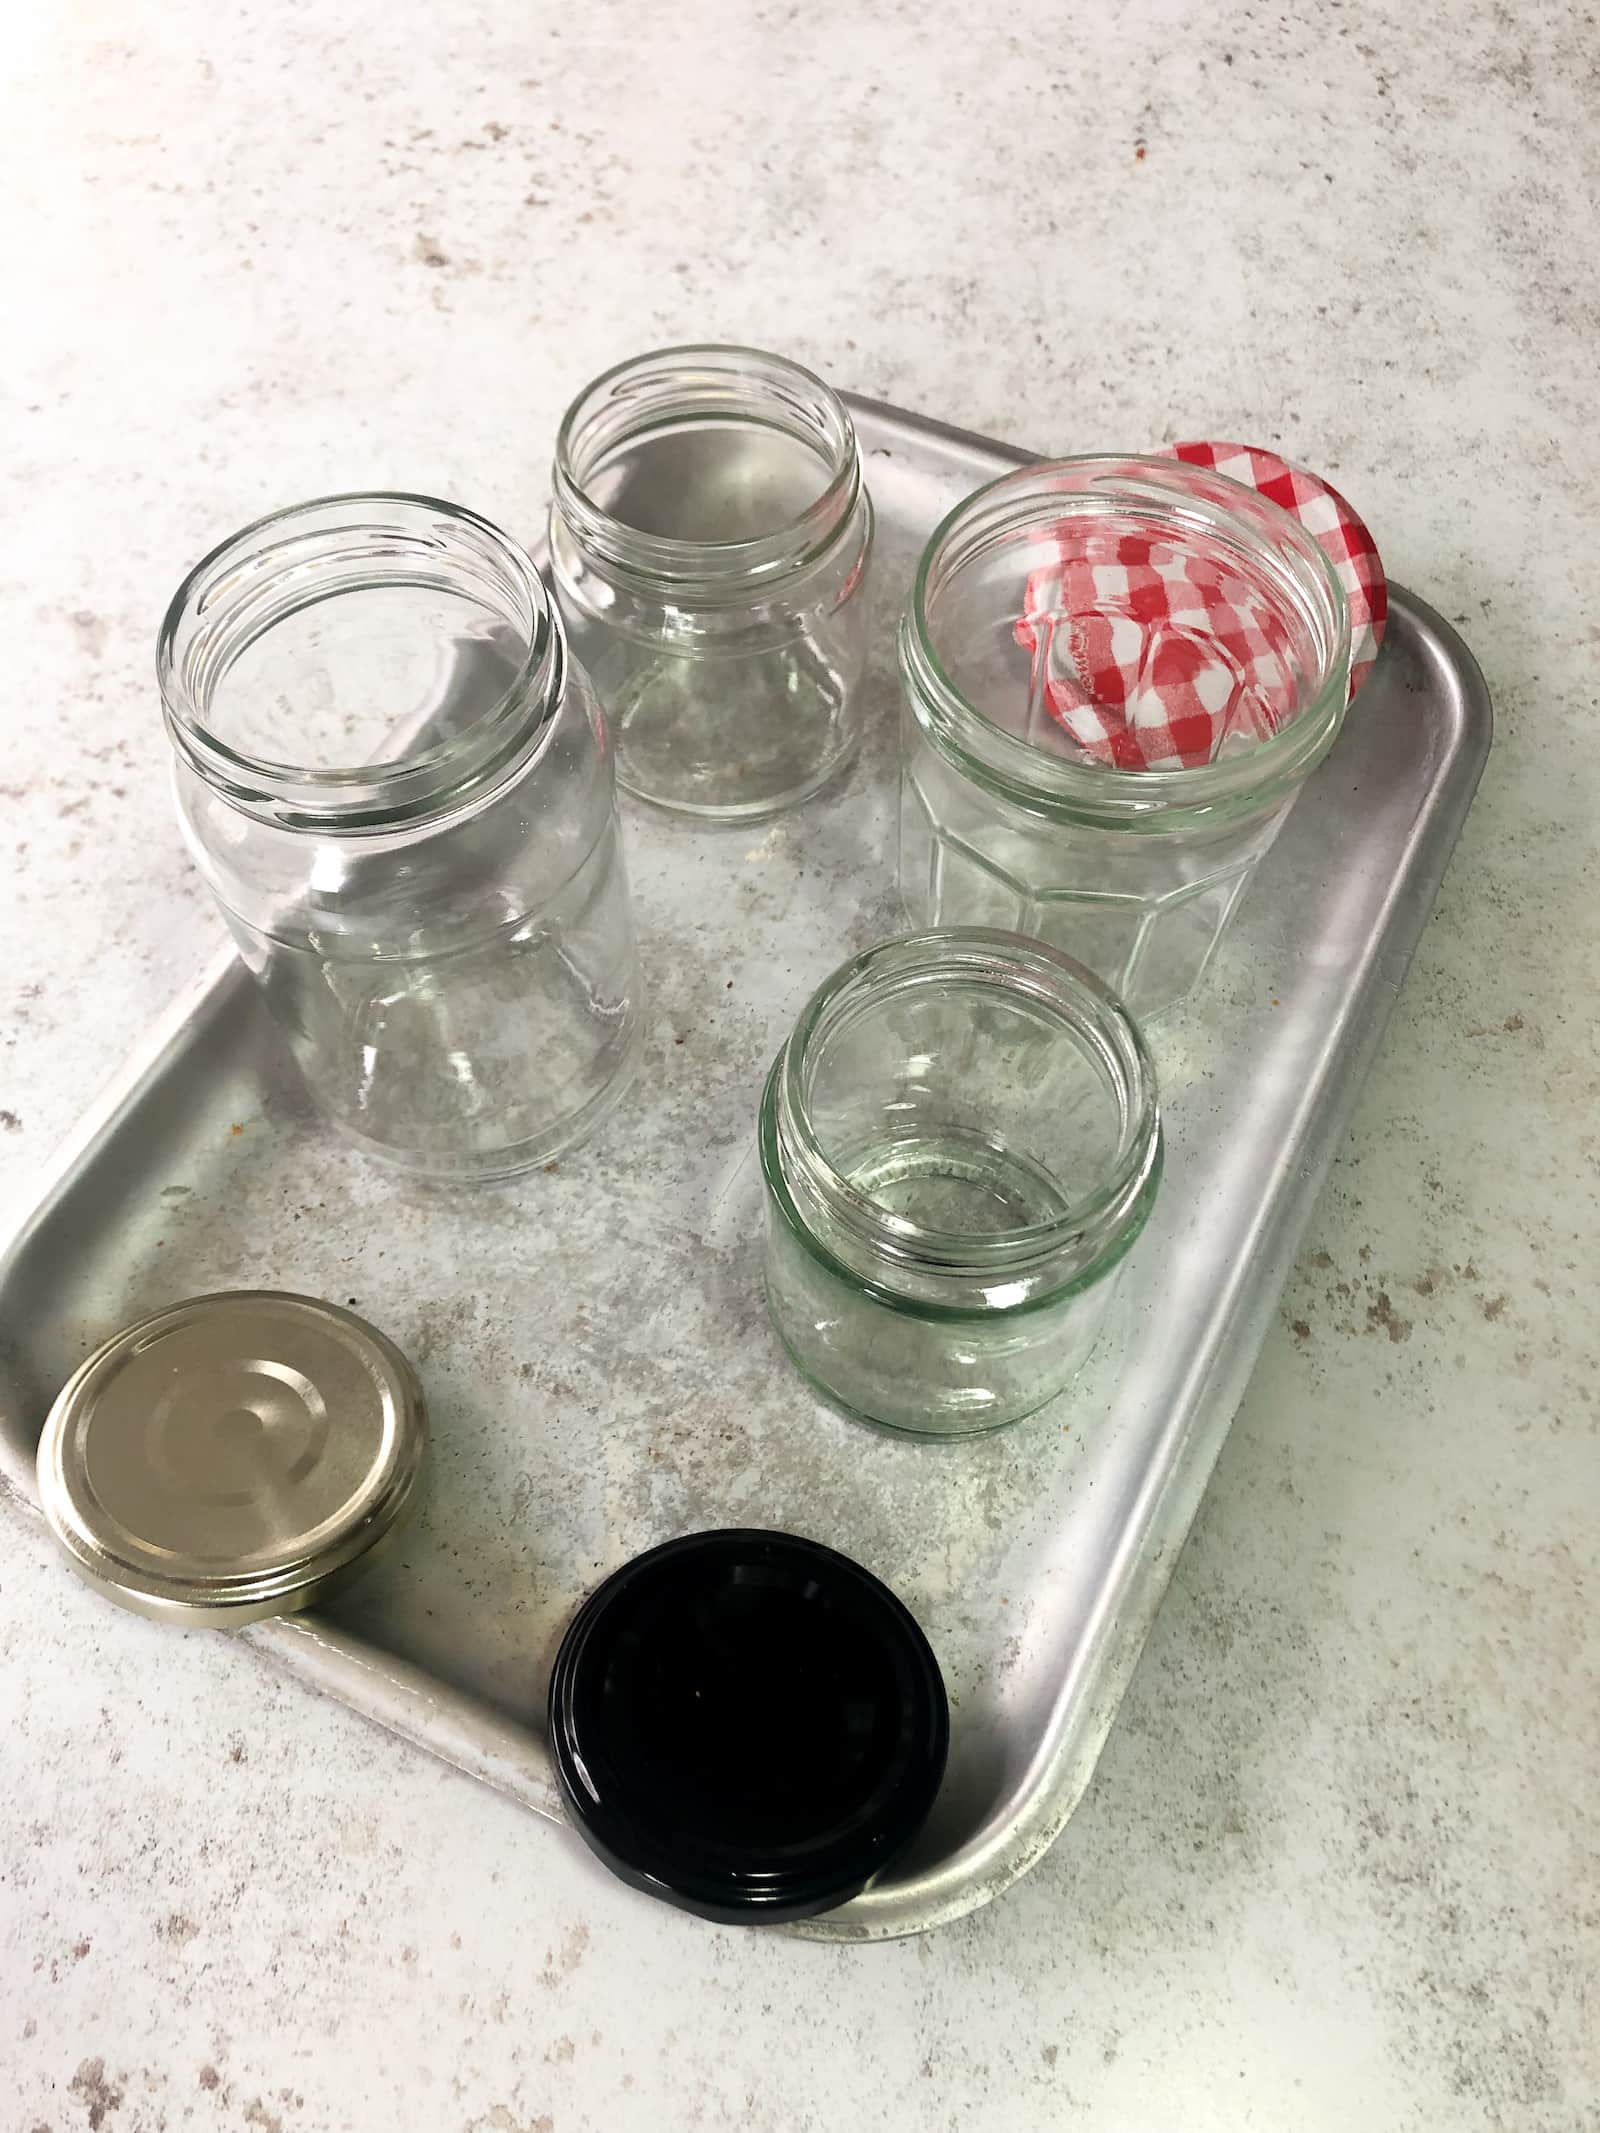 Tray filled with 4 glass jars and lids